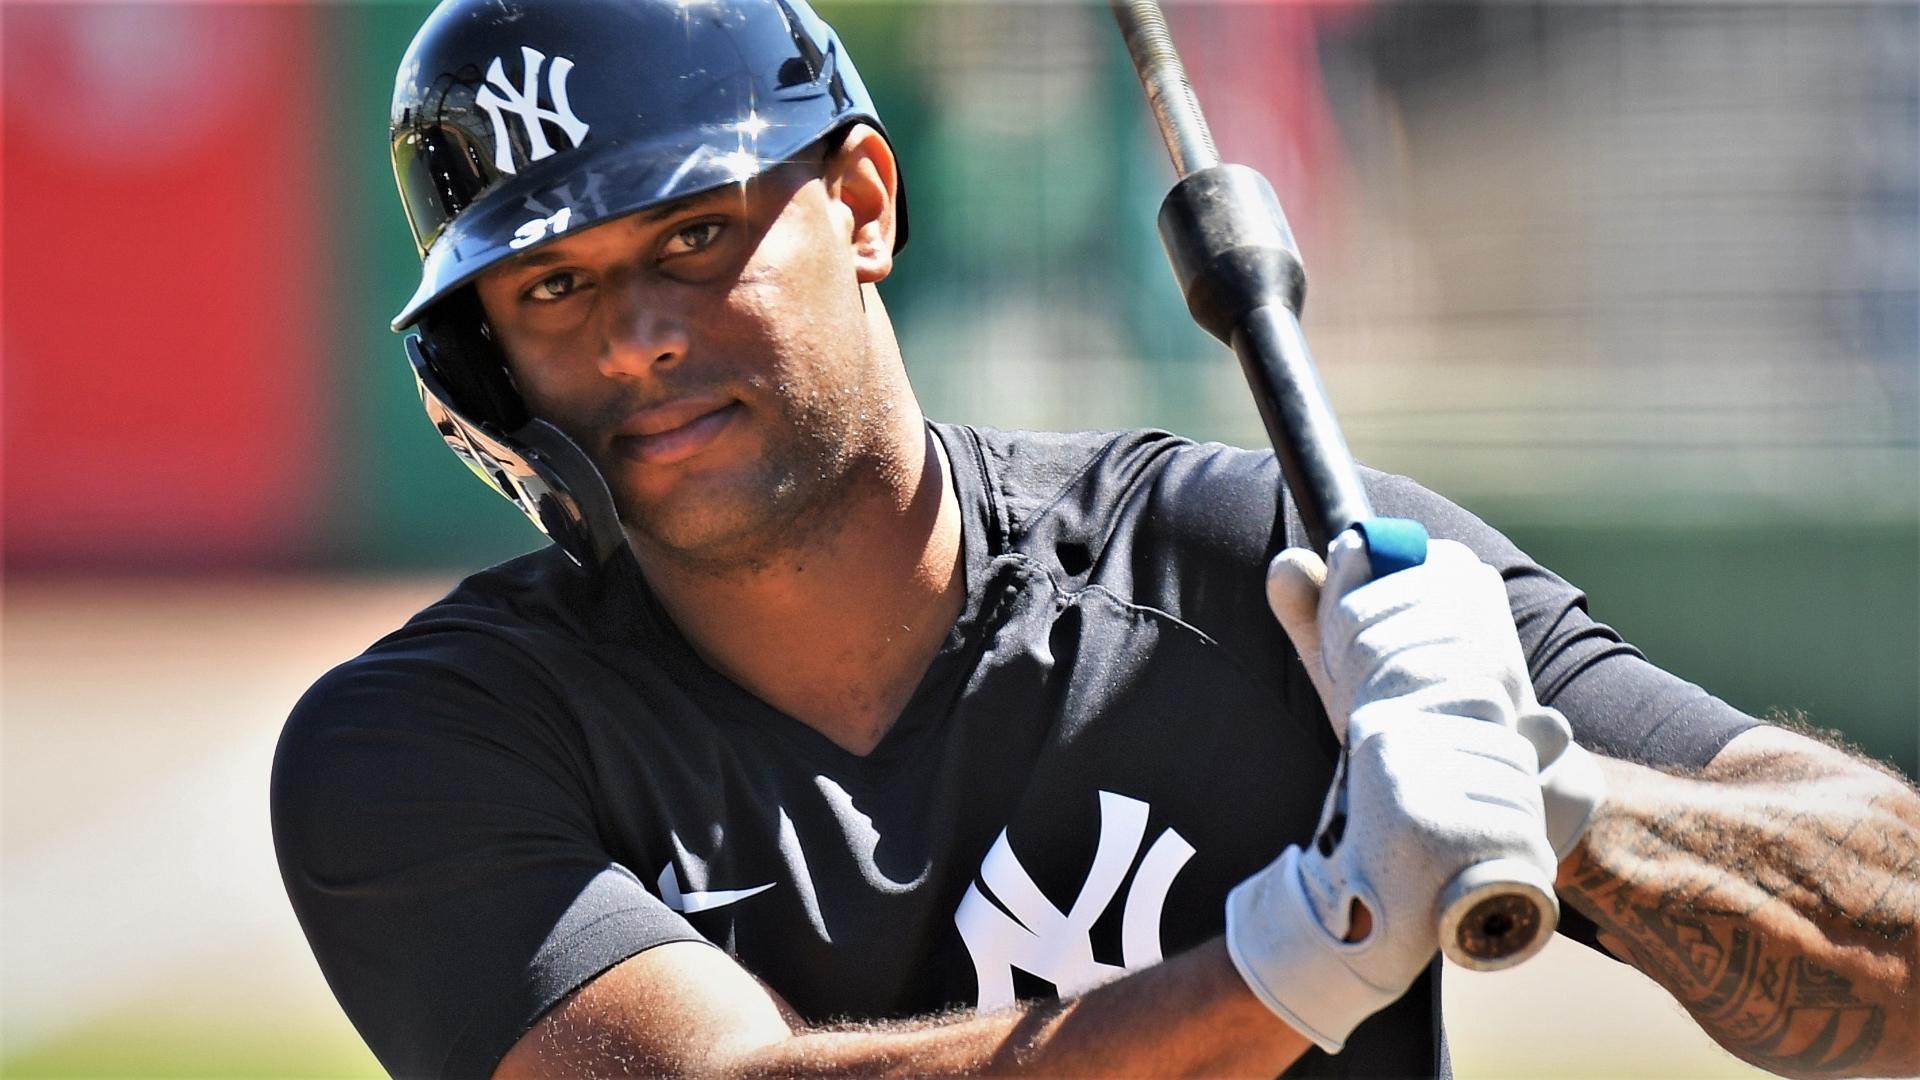 New York Yankees outfielder Aaron Hicks (31) prepares to take batting practice before the game against the Philadelphia Phillies during spring training at BayCare Ballpark. Mandatory Credit: Jonathan Dyer-USA TODAY Sports / © Jonathan Dyer-USA TODAY Sports